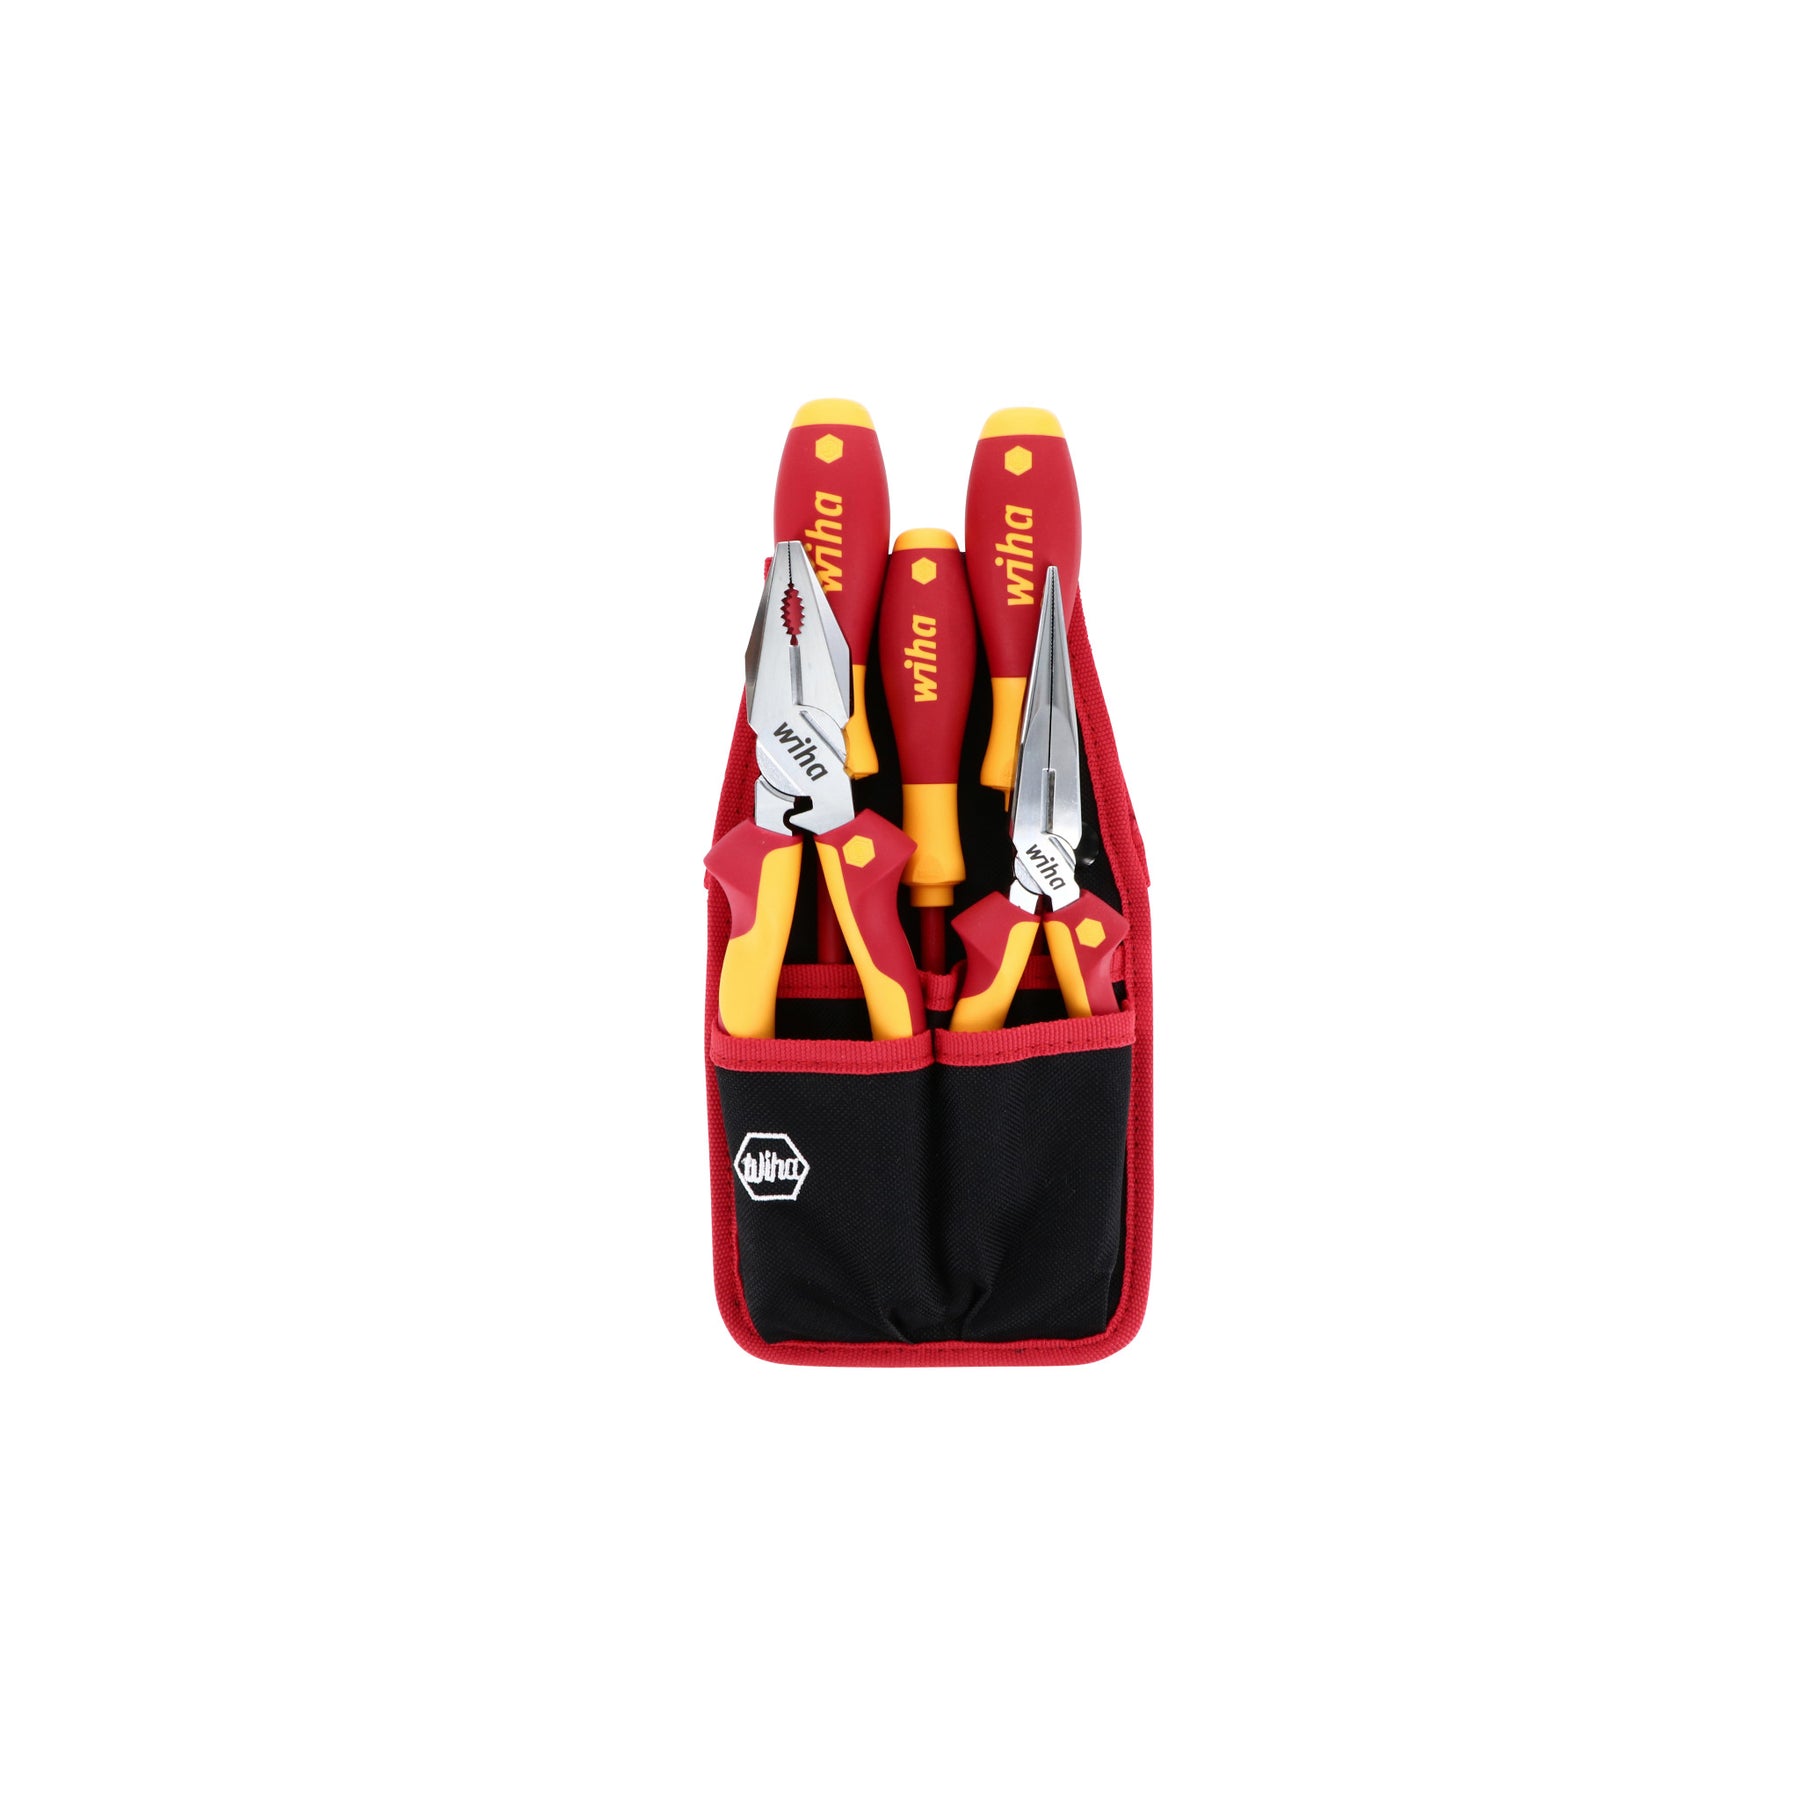 5 Piece Insulated Pliers and Cutters with SlimLine Screwdrivers Set